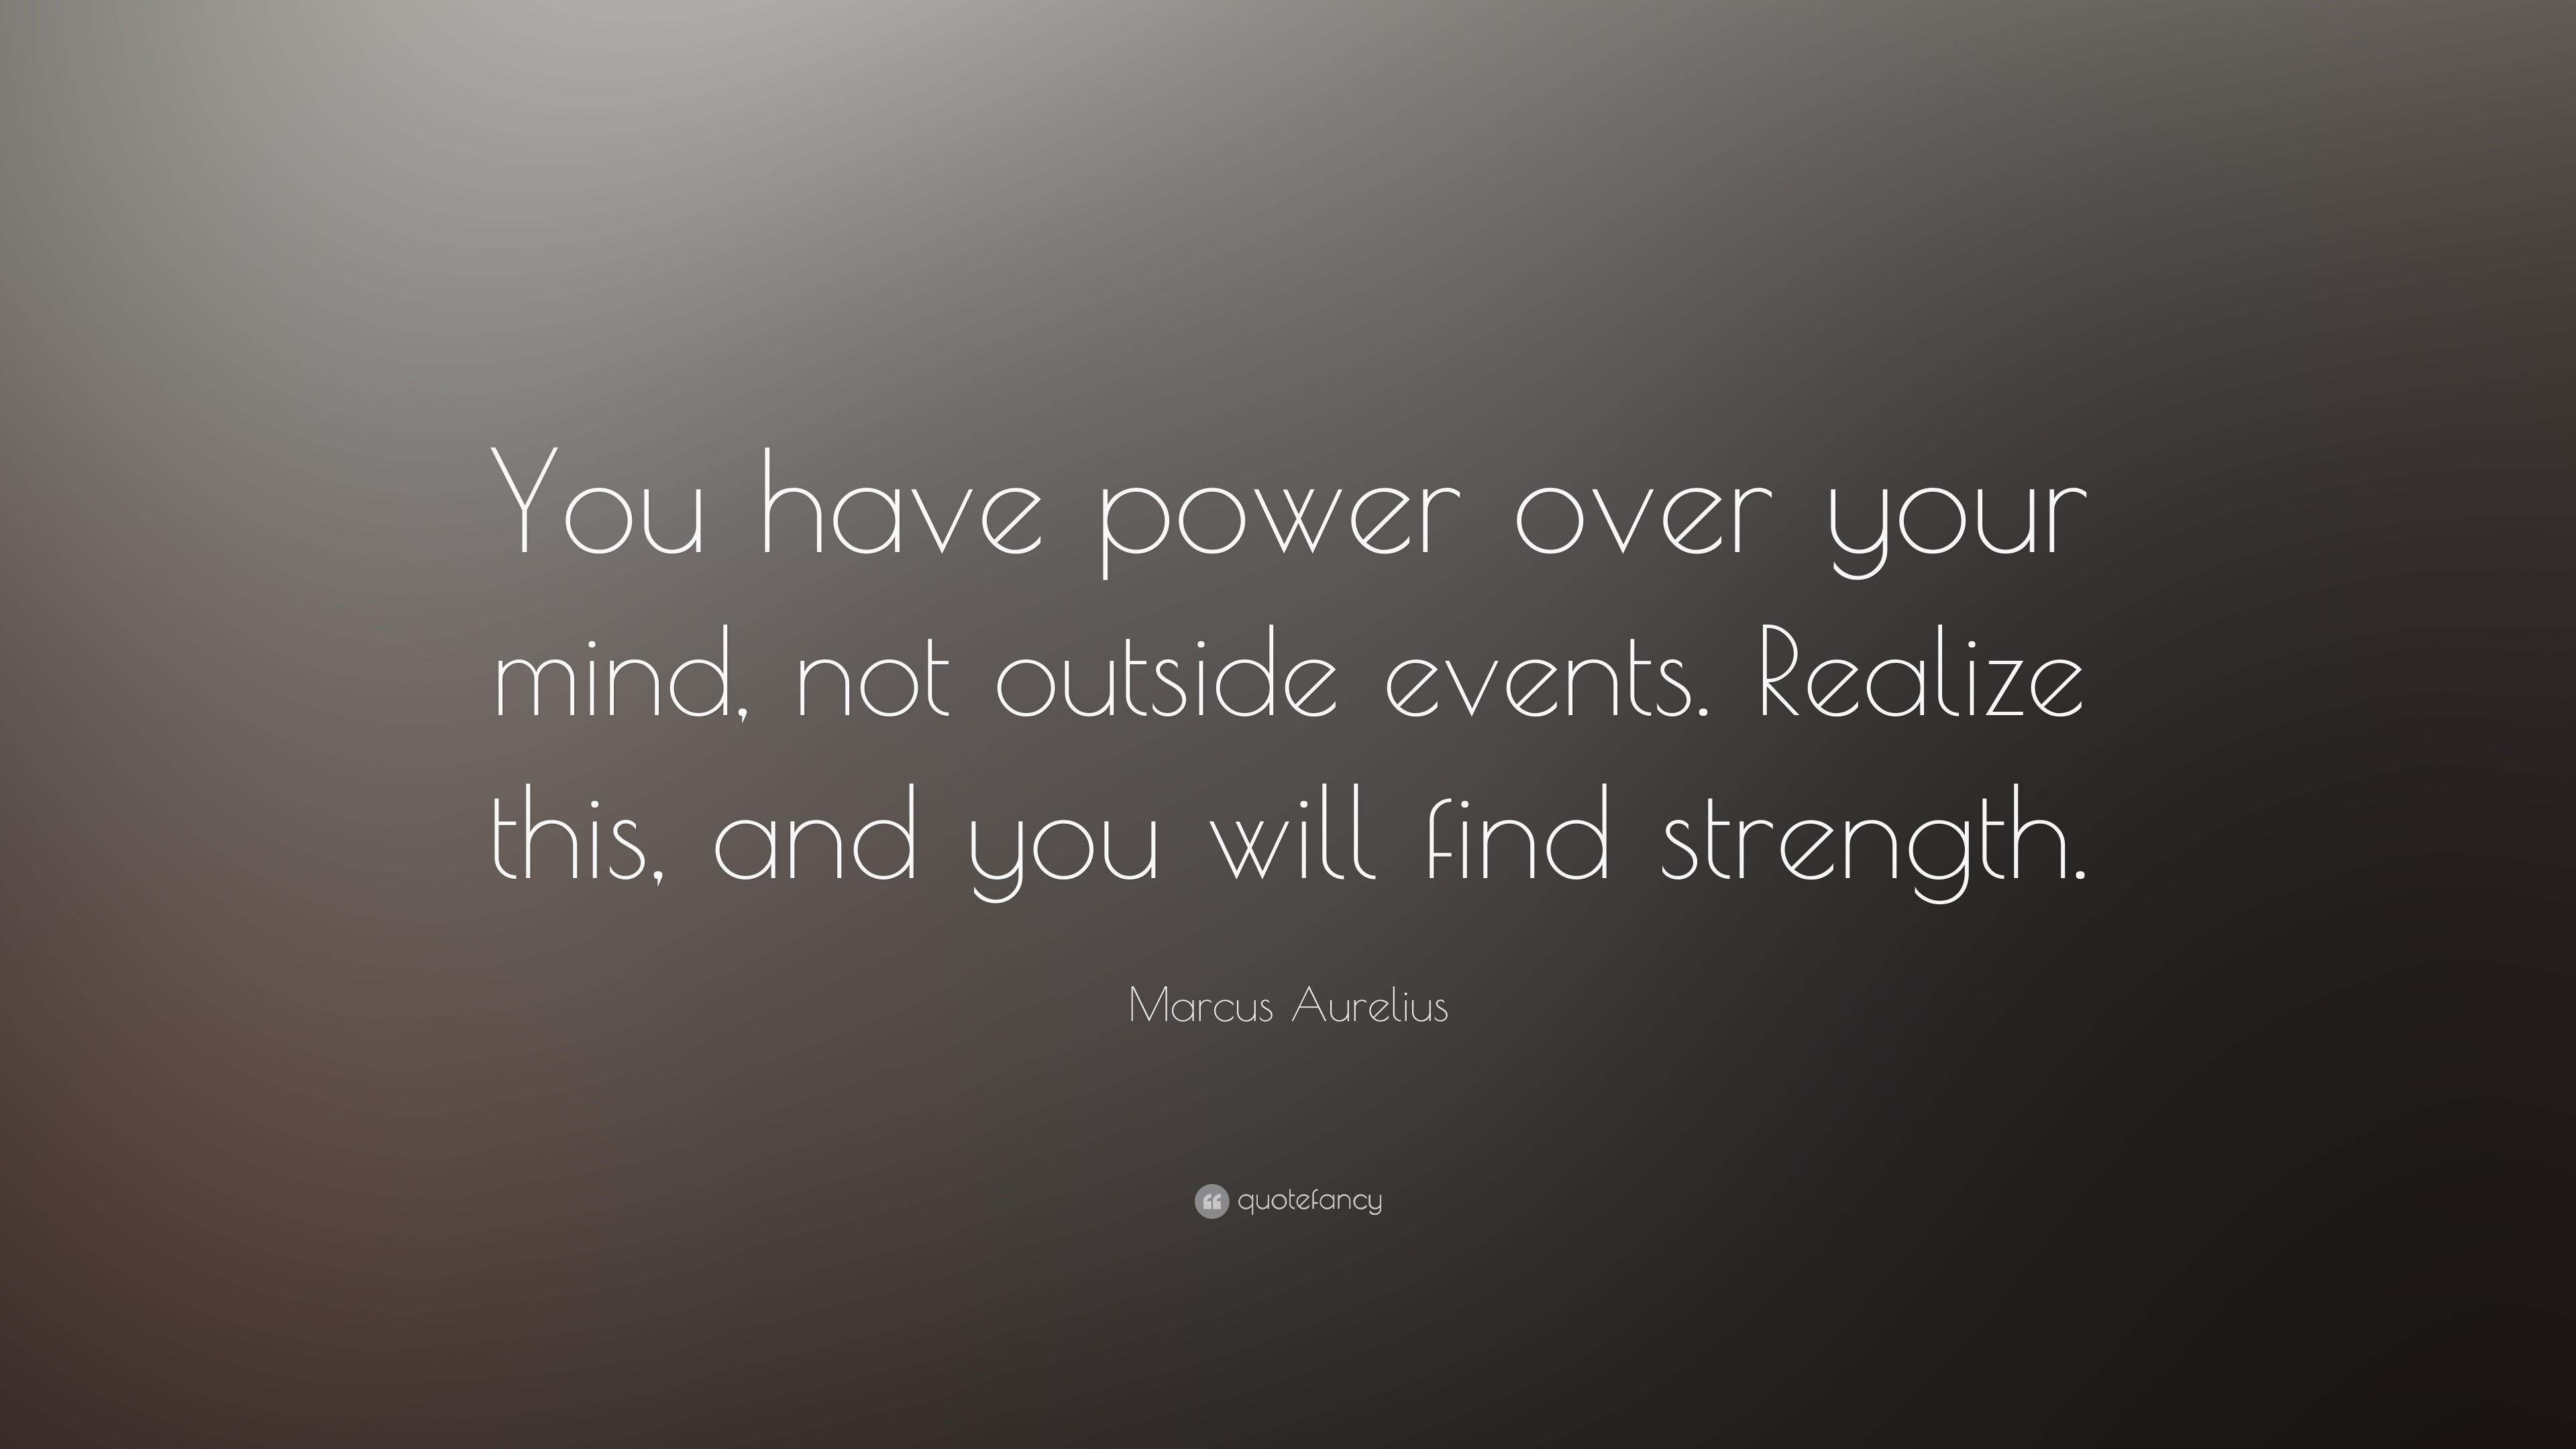 Marcus Aurelius Quote: “You have power over your mind, not outside ...